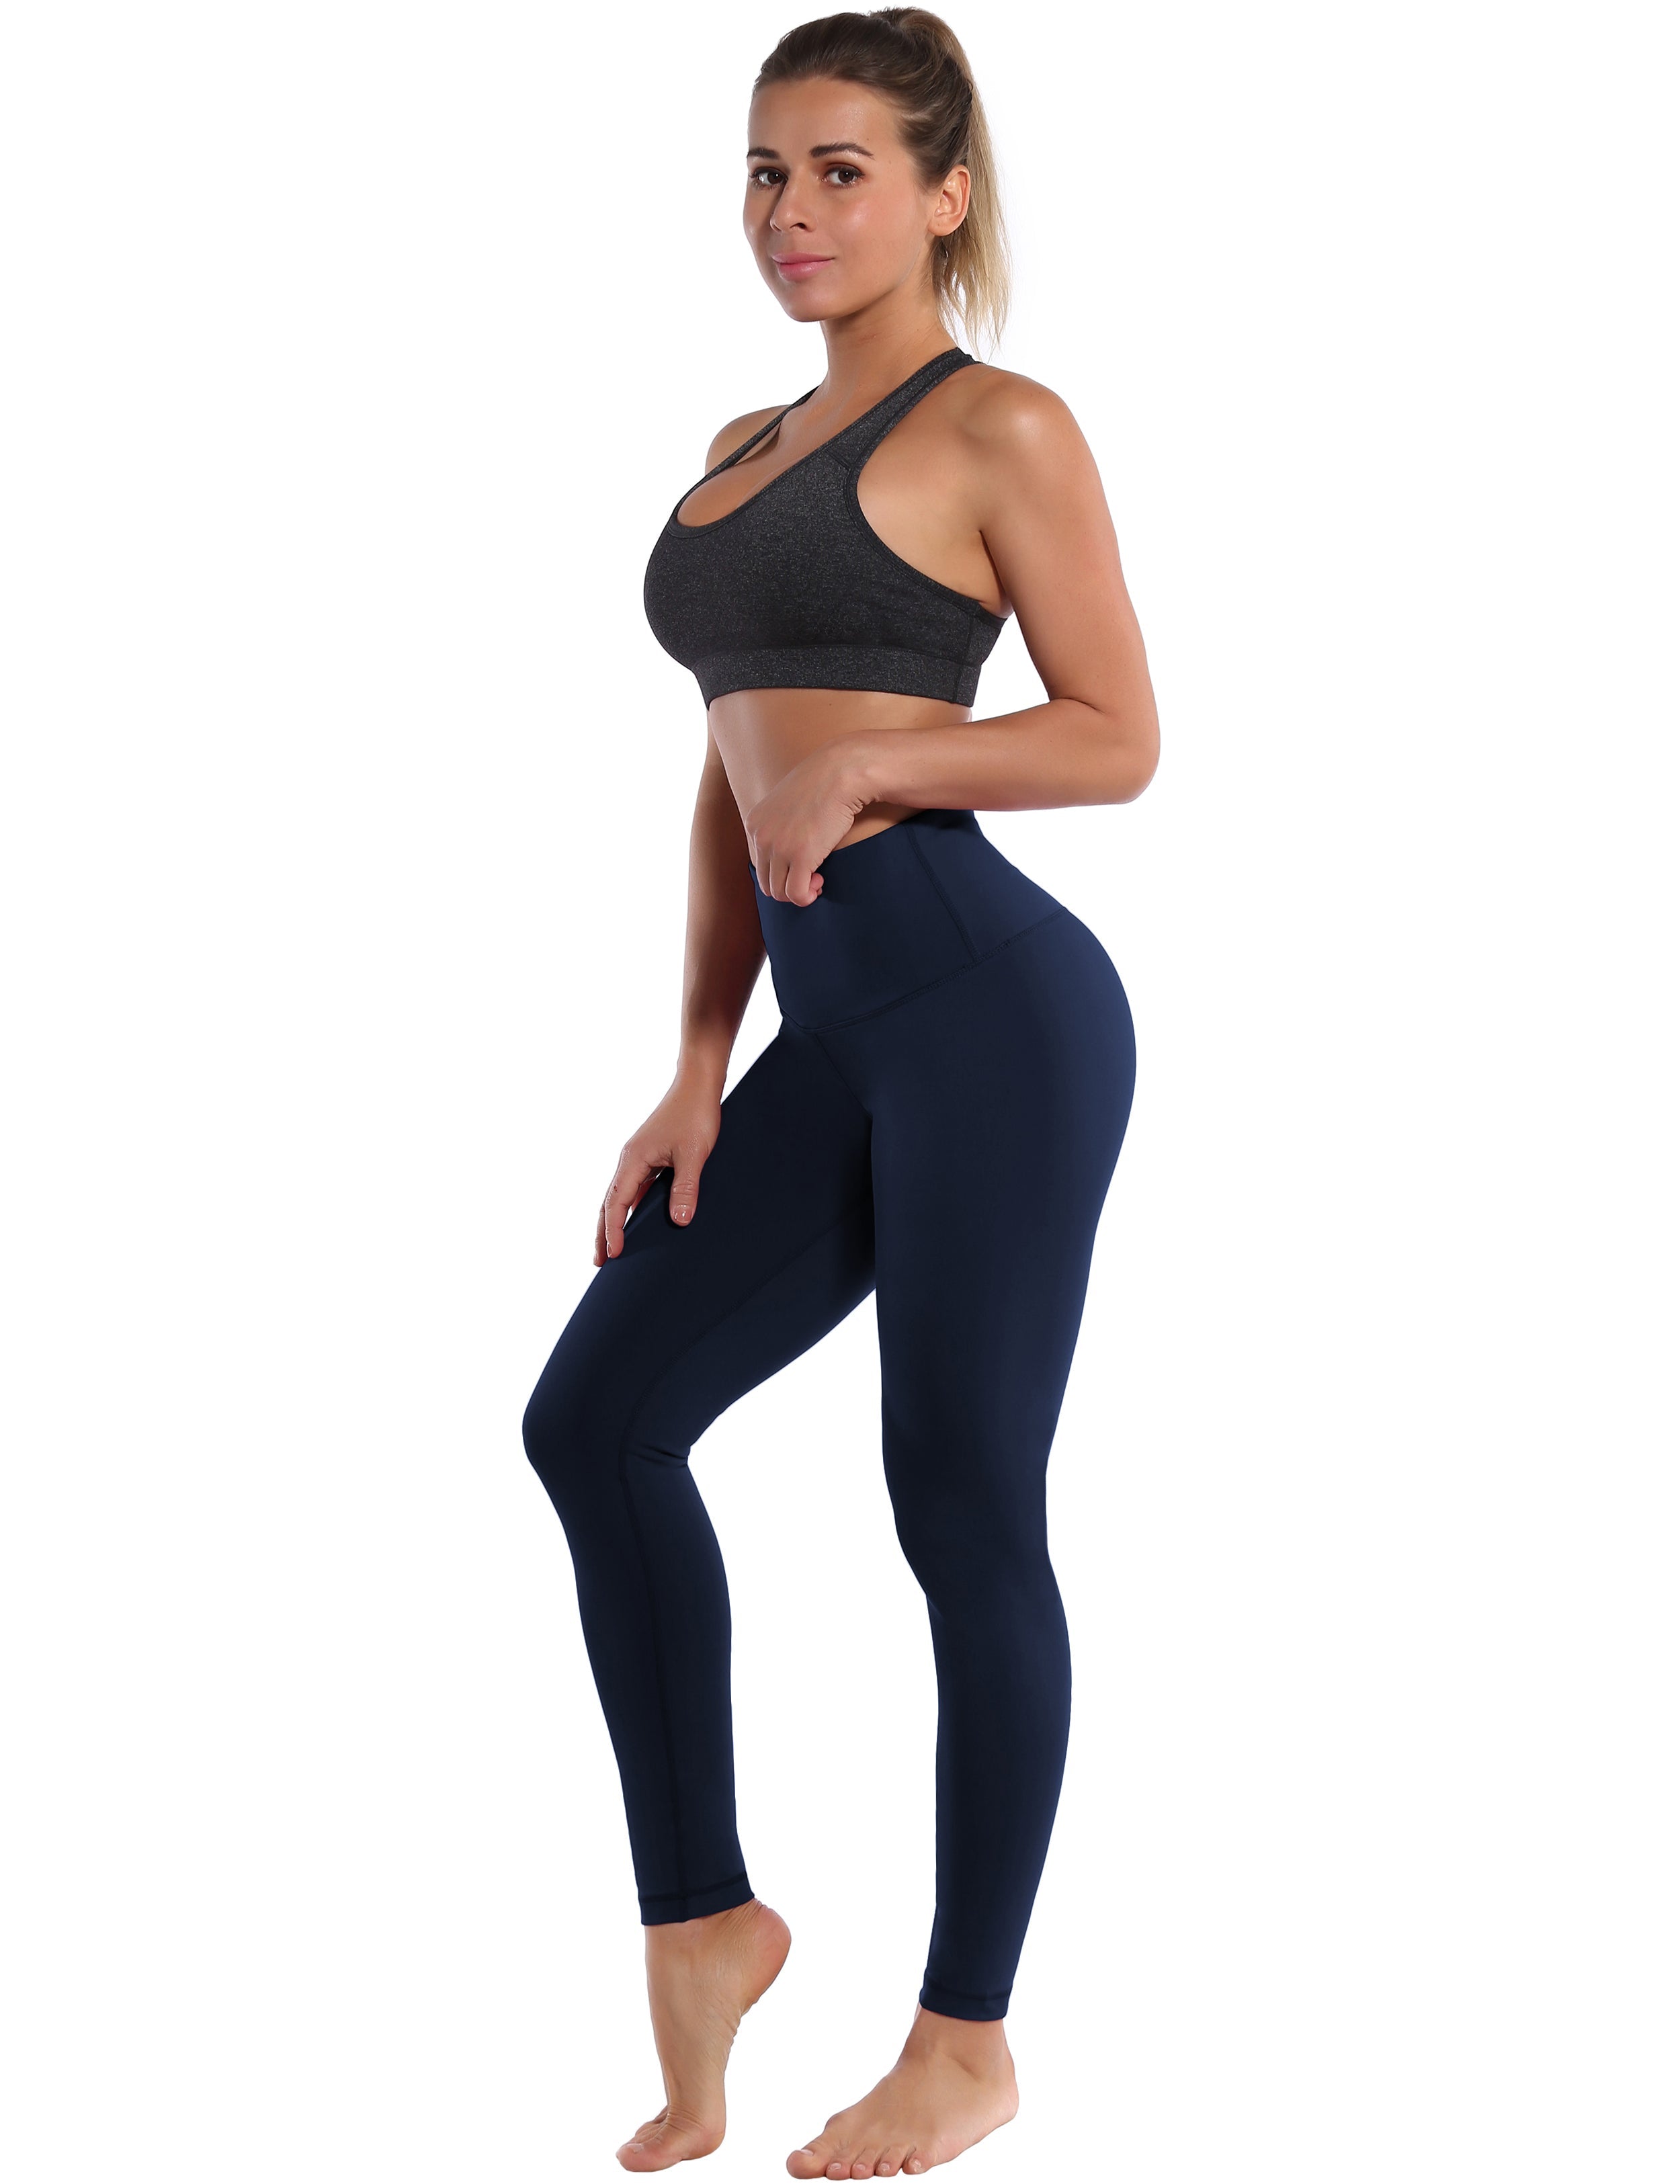 High Waist Golf Pants darknavy 75%Nylon/25%Spandex Fabric doesn't attract lint easily 4-way stretch No see-through Moisture-wicking Tummy control Inner pocket Four lengths